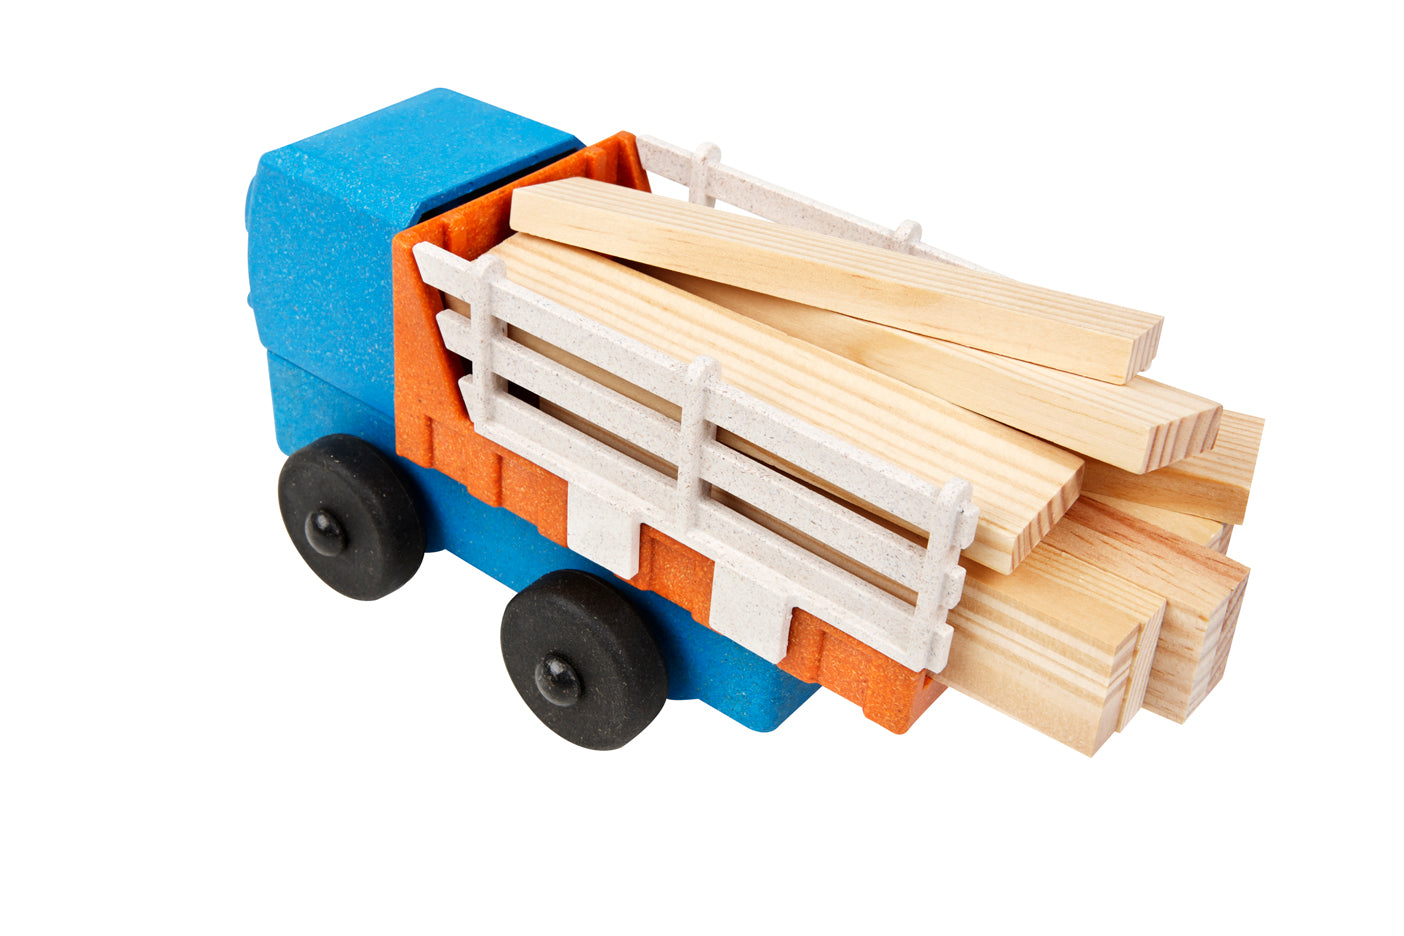 Luke's Toy Factory Stake truck toy with lumber cargo